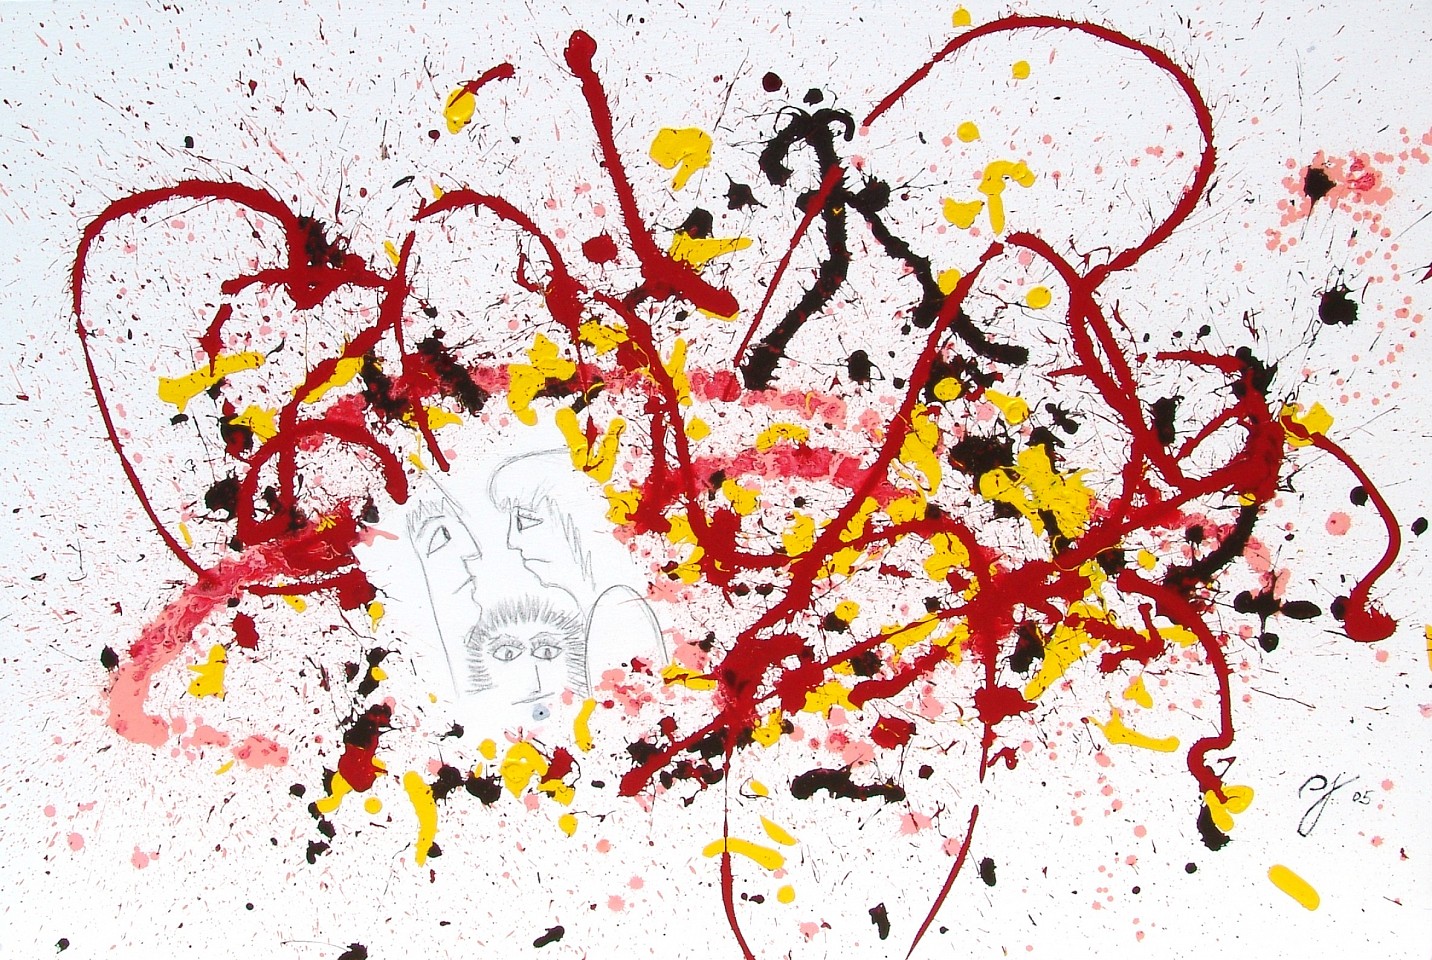 Diego Jacobson, Negociation, 2005
Mixed Media on Canvas, 72 x 48 in. (182.9 x 121.9 cm)
0721